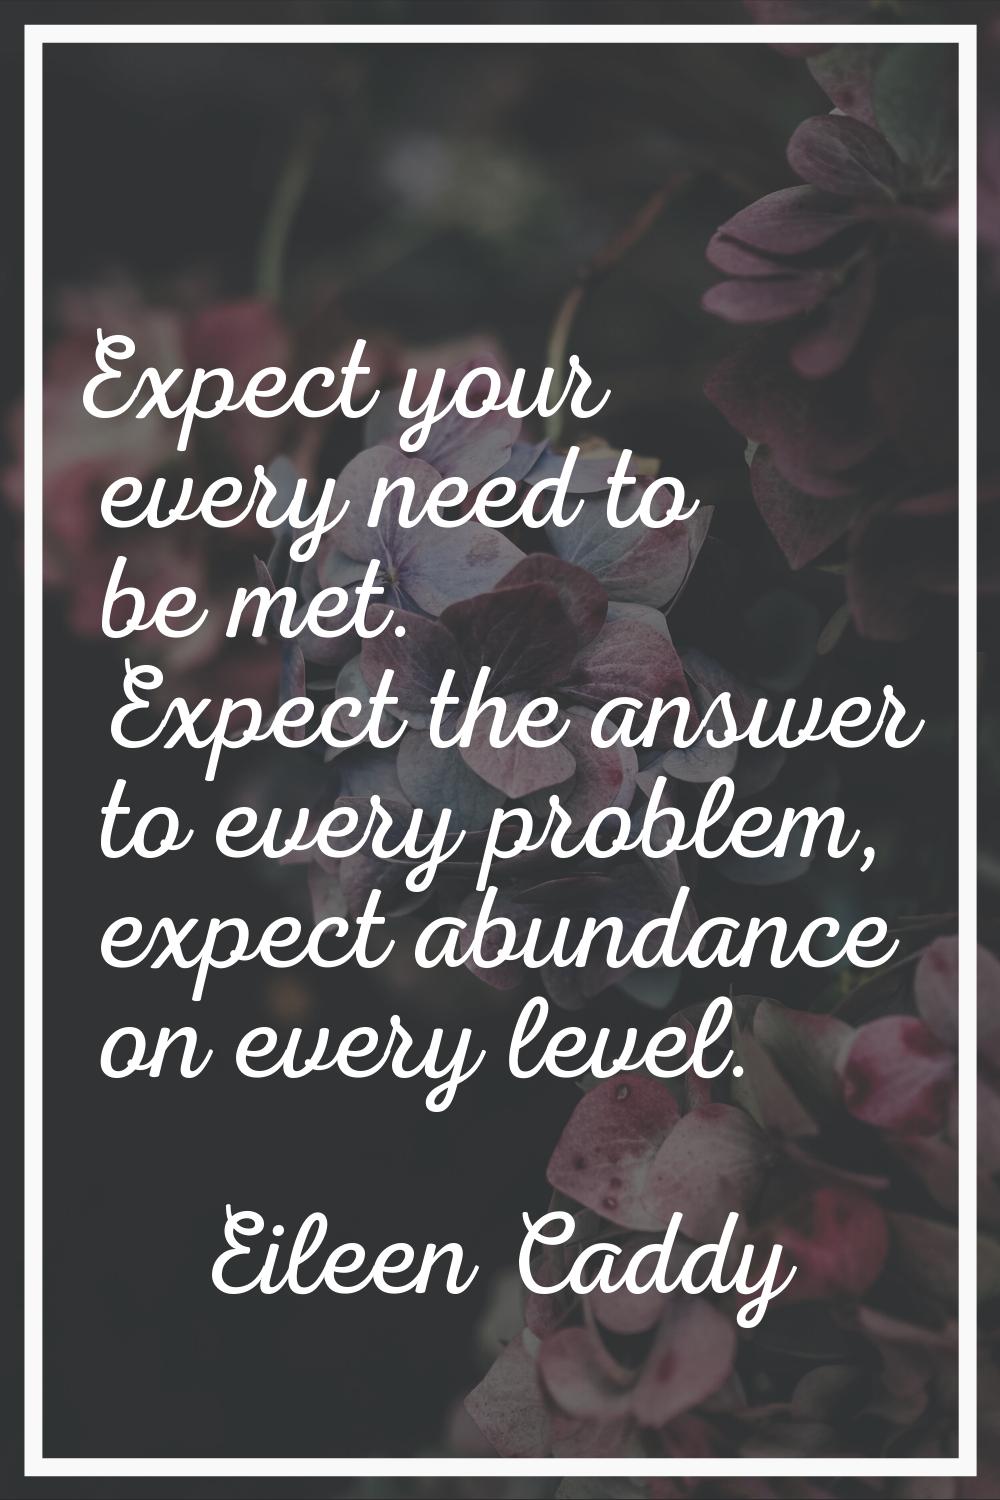 Expect your every need to be met. Expect the answer to every problem, expect abundance on every lev